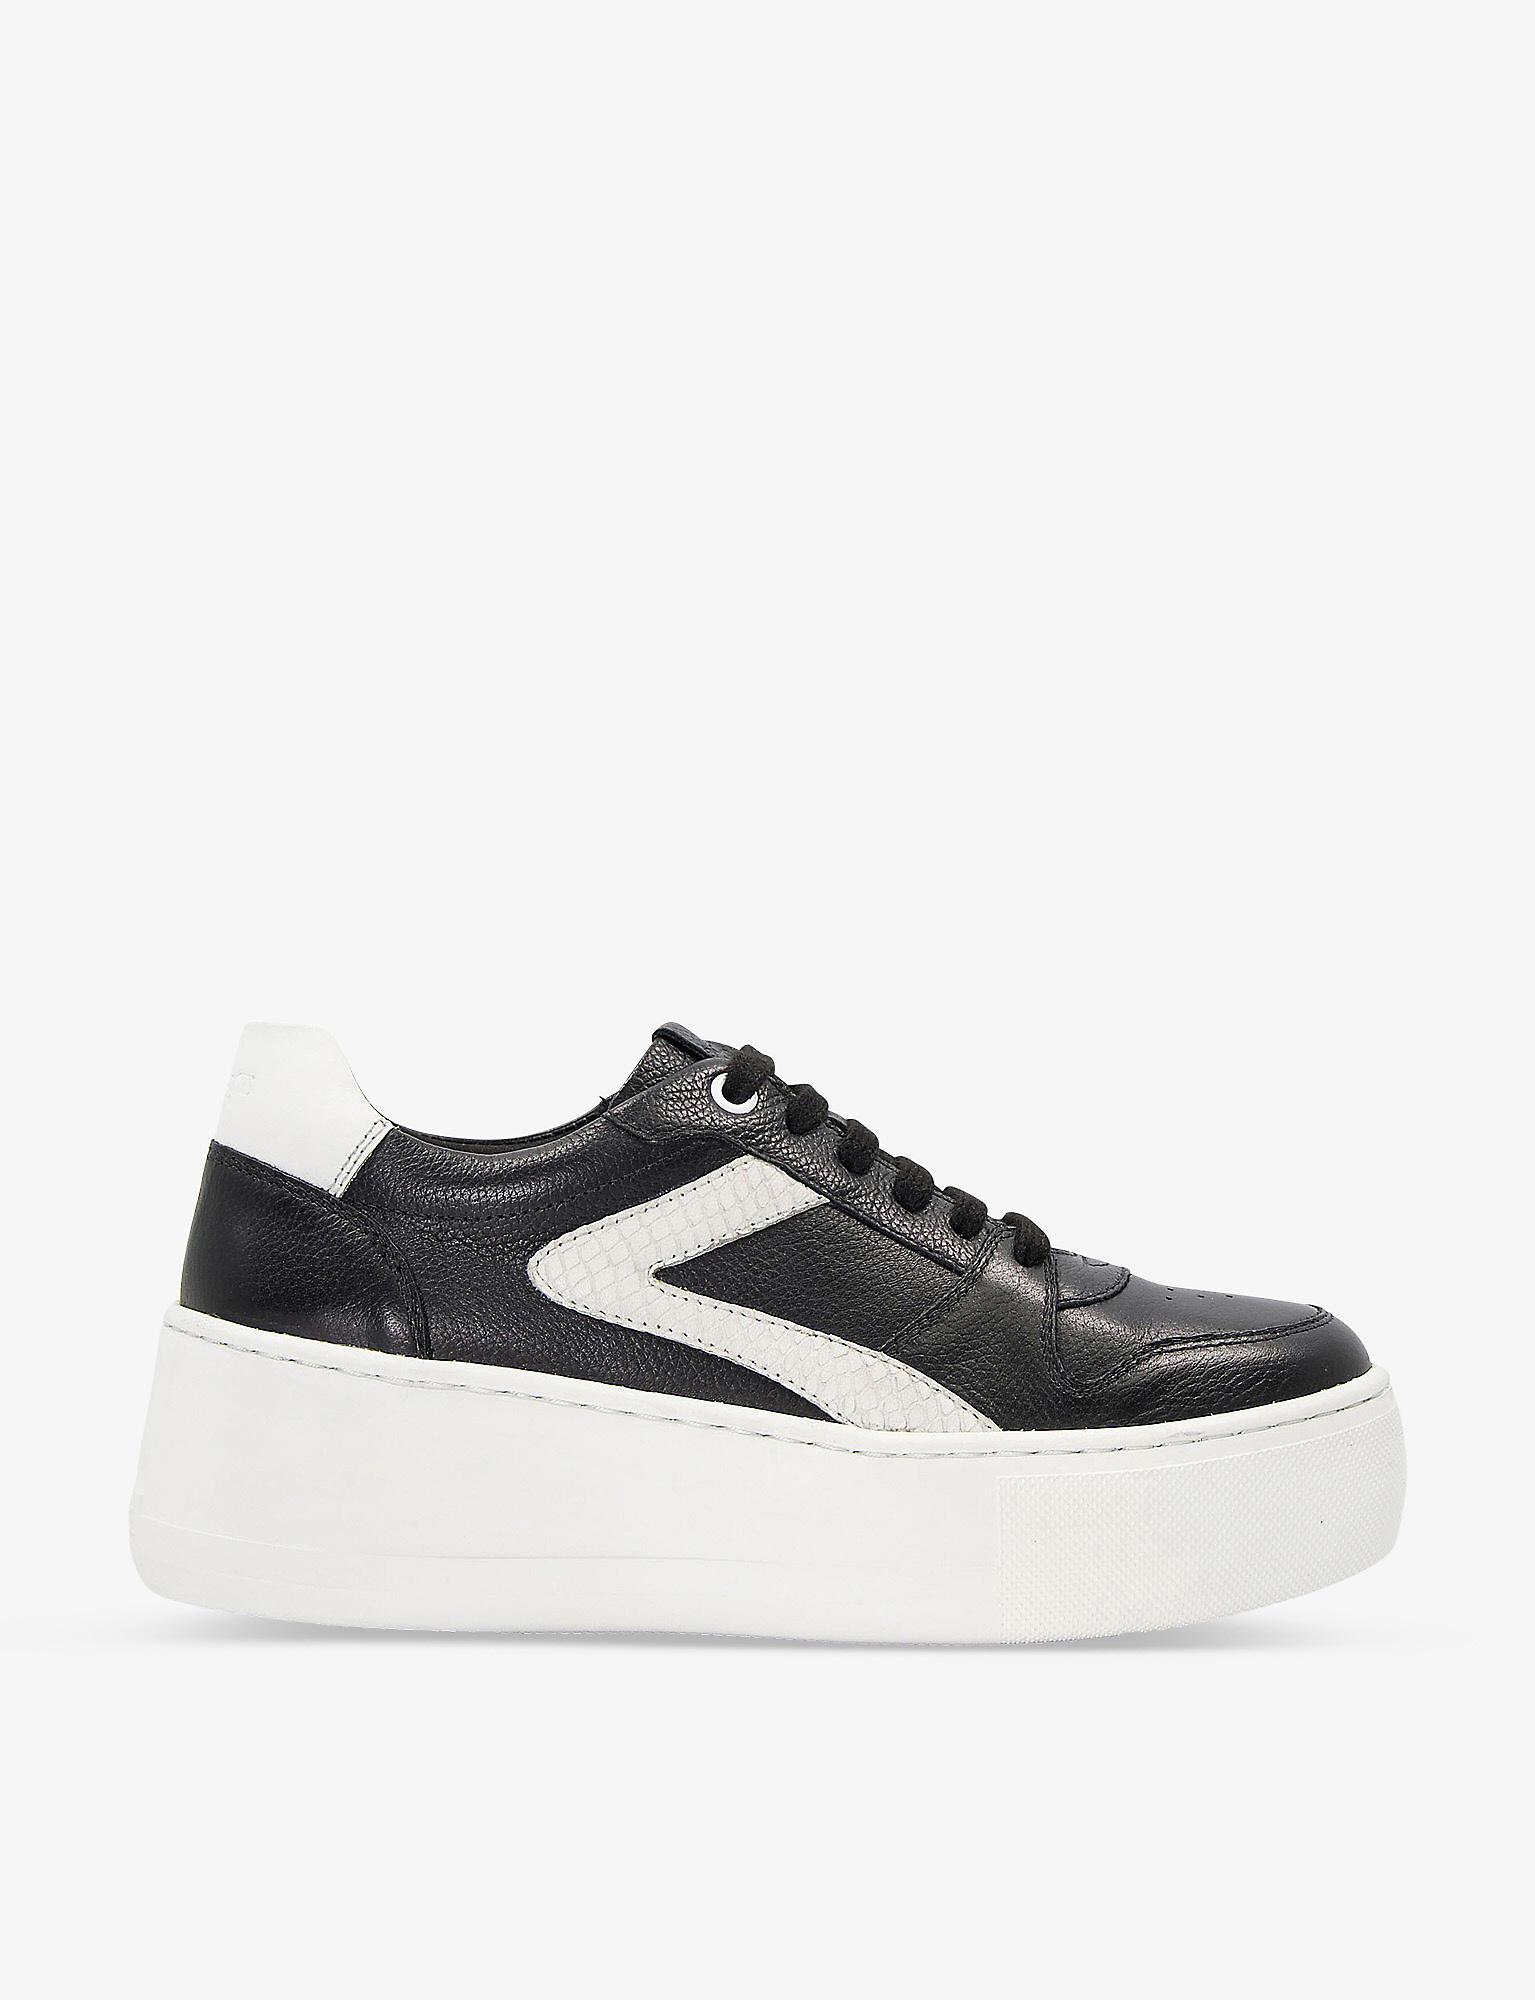 Dune Essential Leather Flatform Trainers in Black-Leather (Black ...